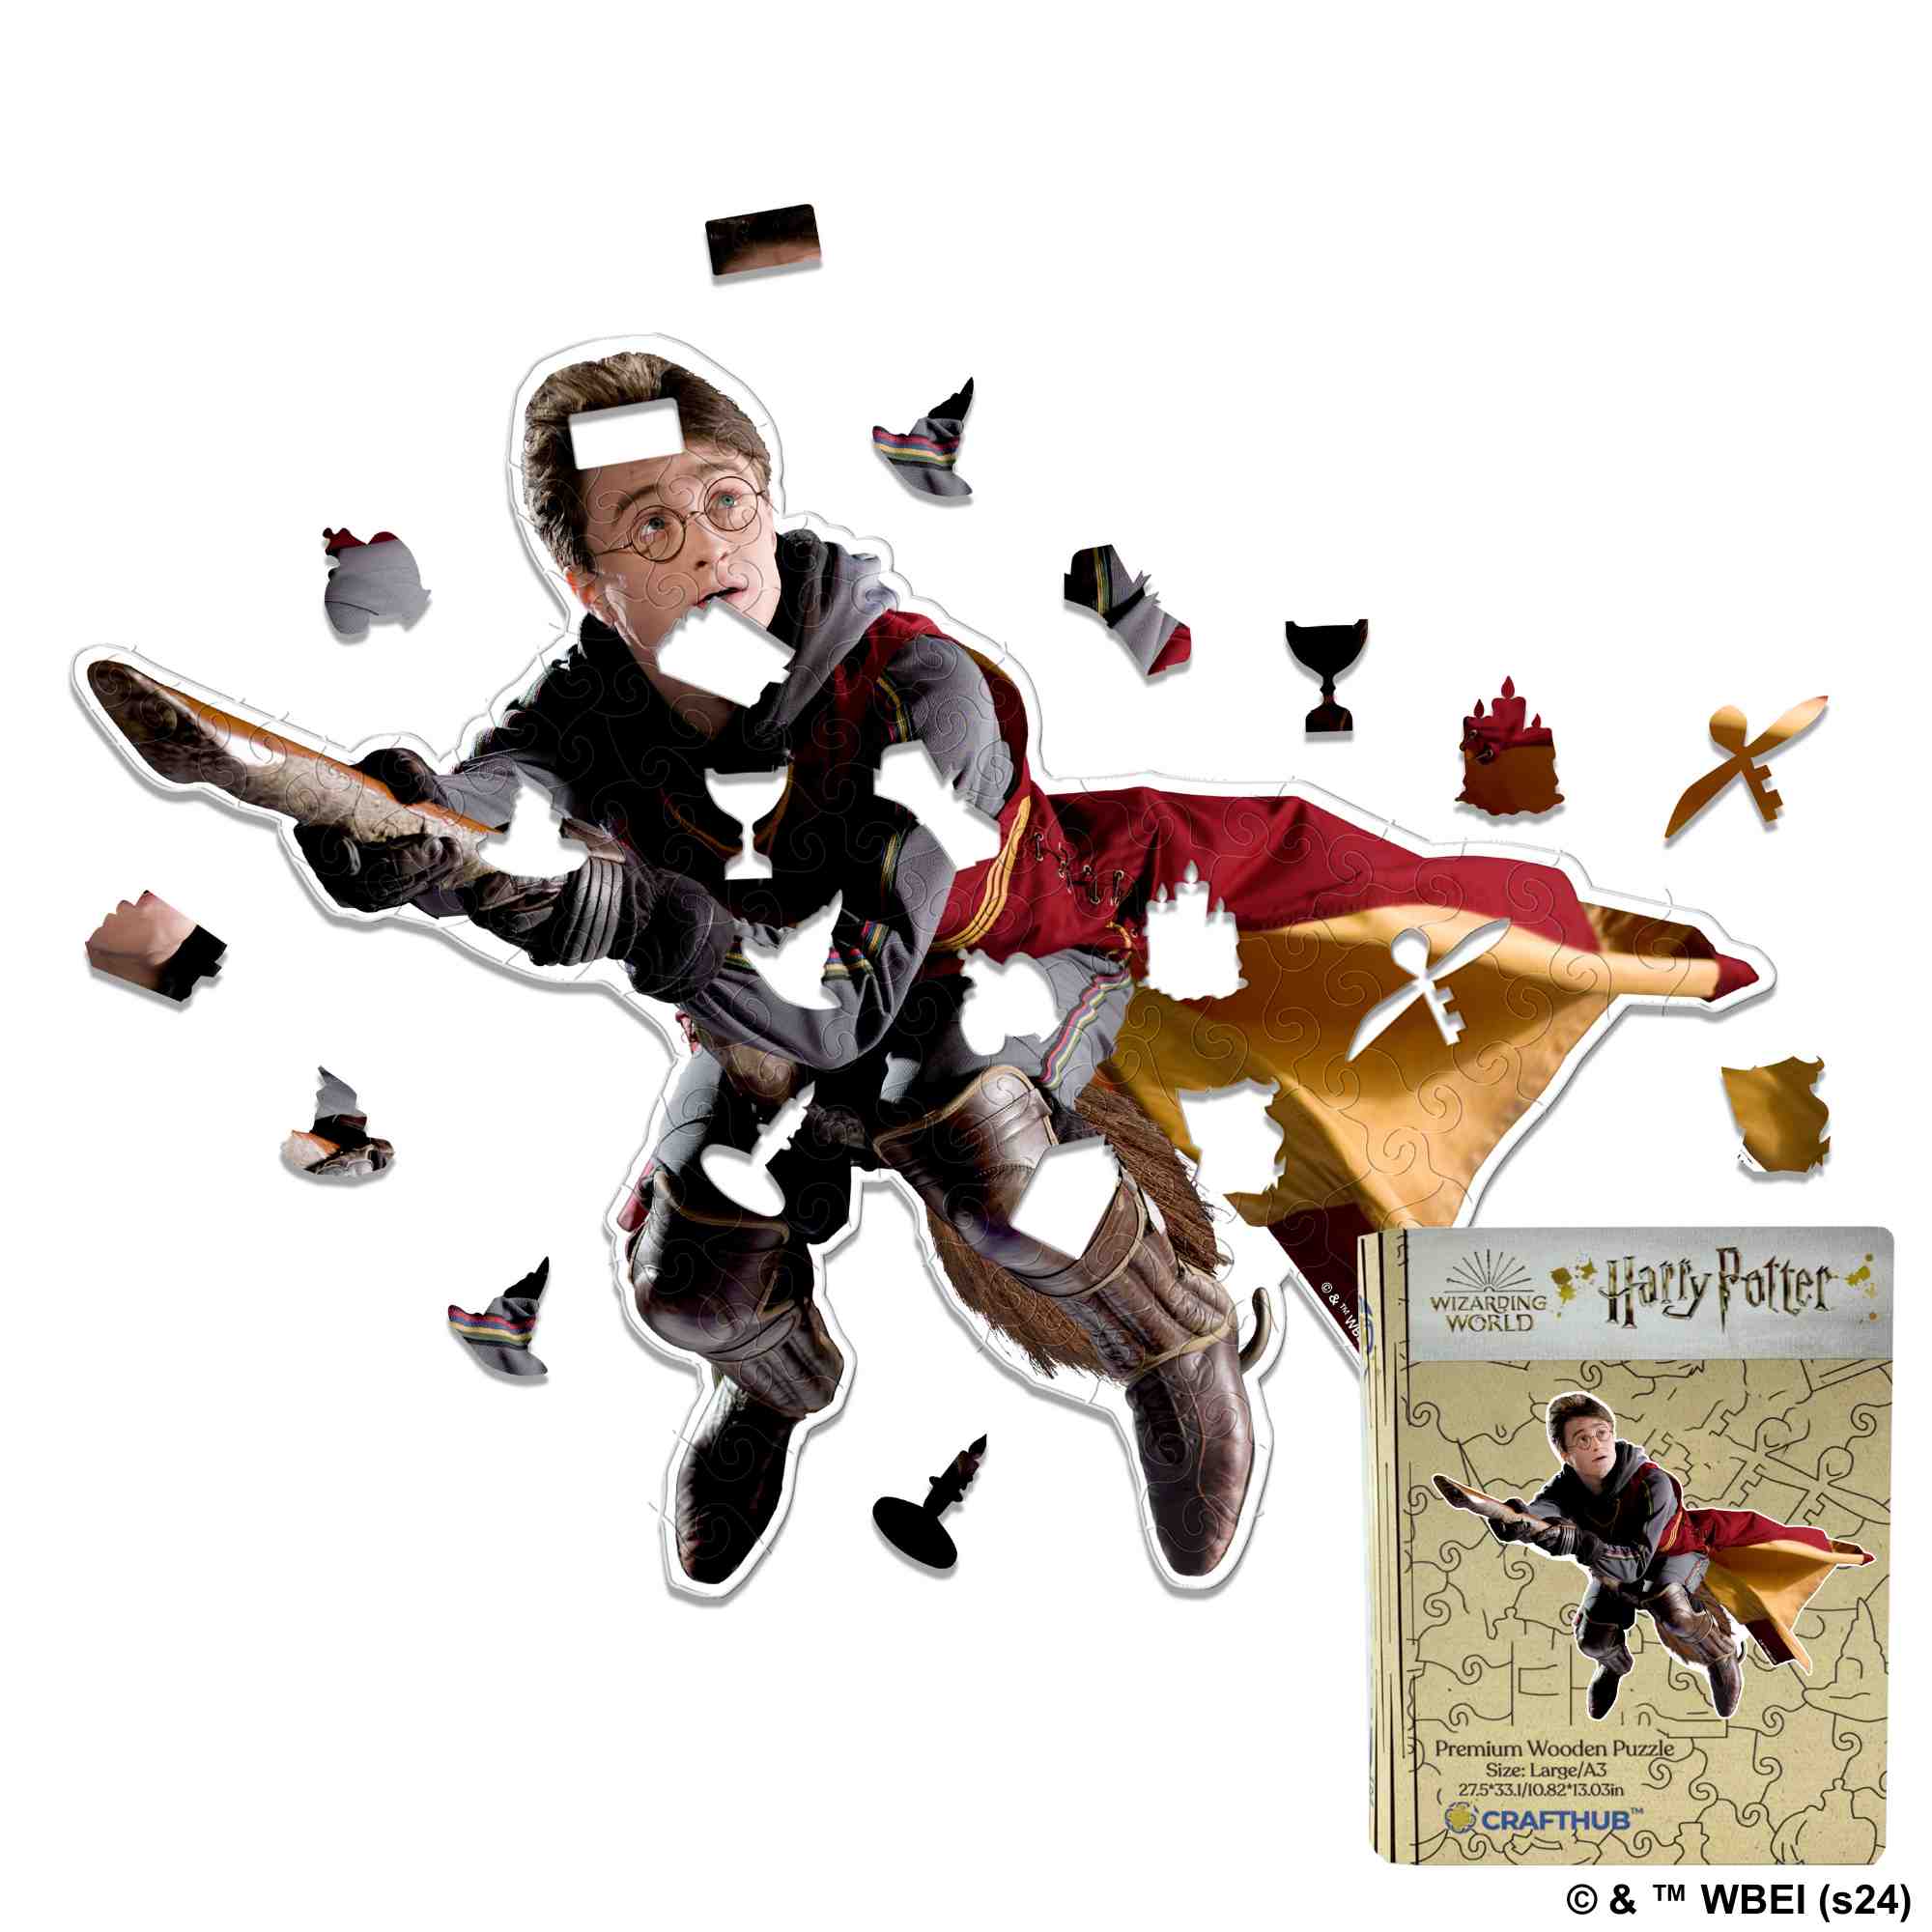 Animal Jigsaw Puzzle > Wooden Jigsaw Puzzle > Jigsaw Puzzle A3 Harry Potter Quidditch Wooden Jigsaw Puzzle